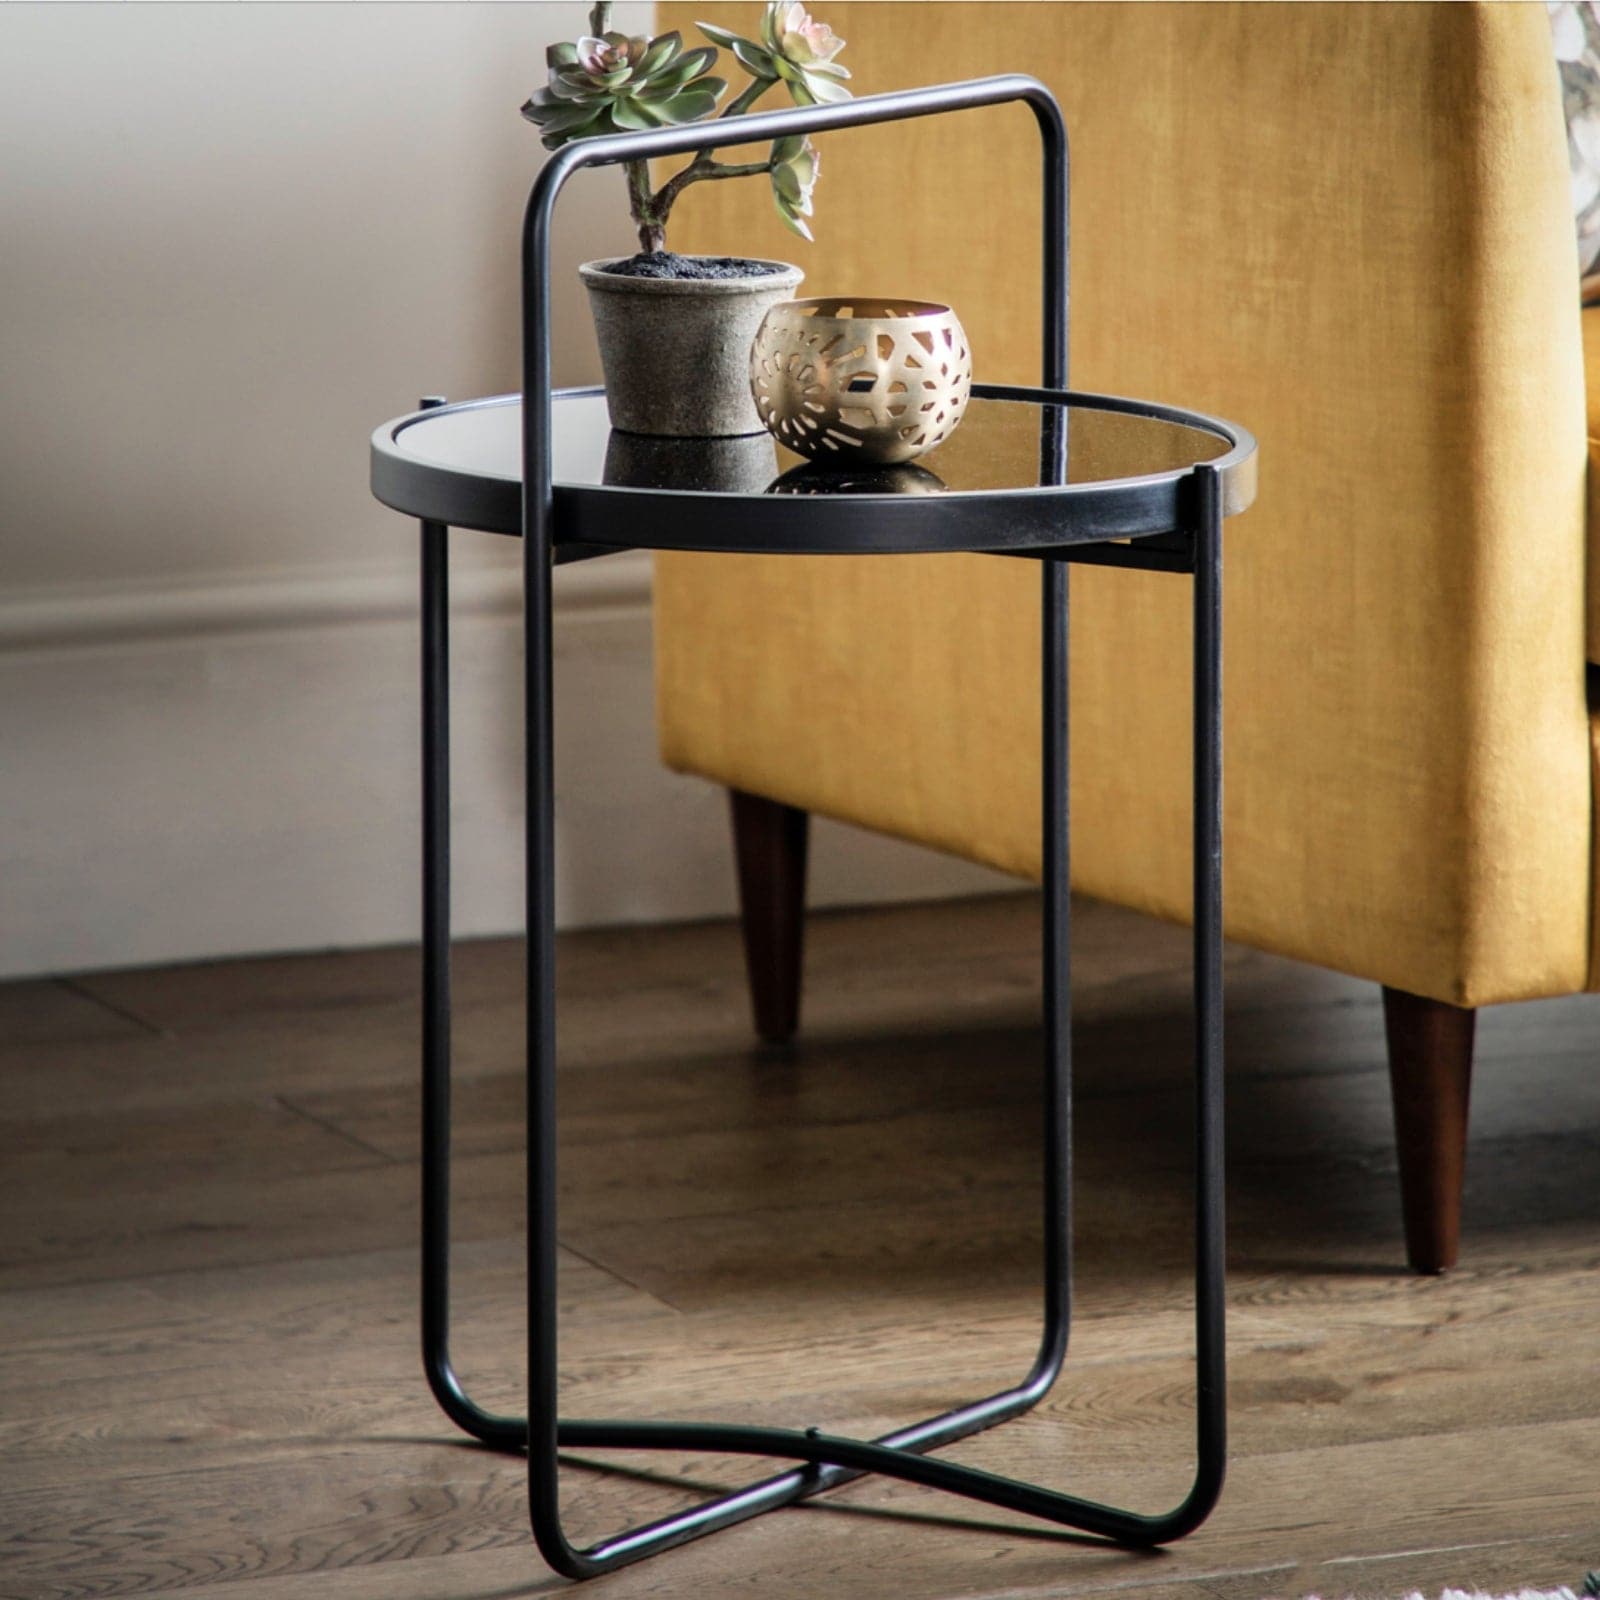 Looped Top Black Metal Side Table with Glass Top - The Farthing